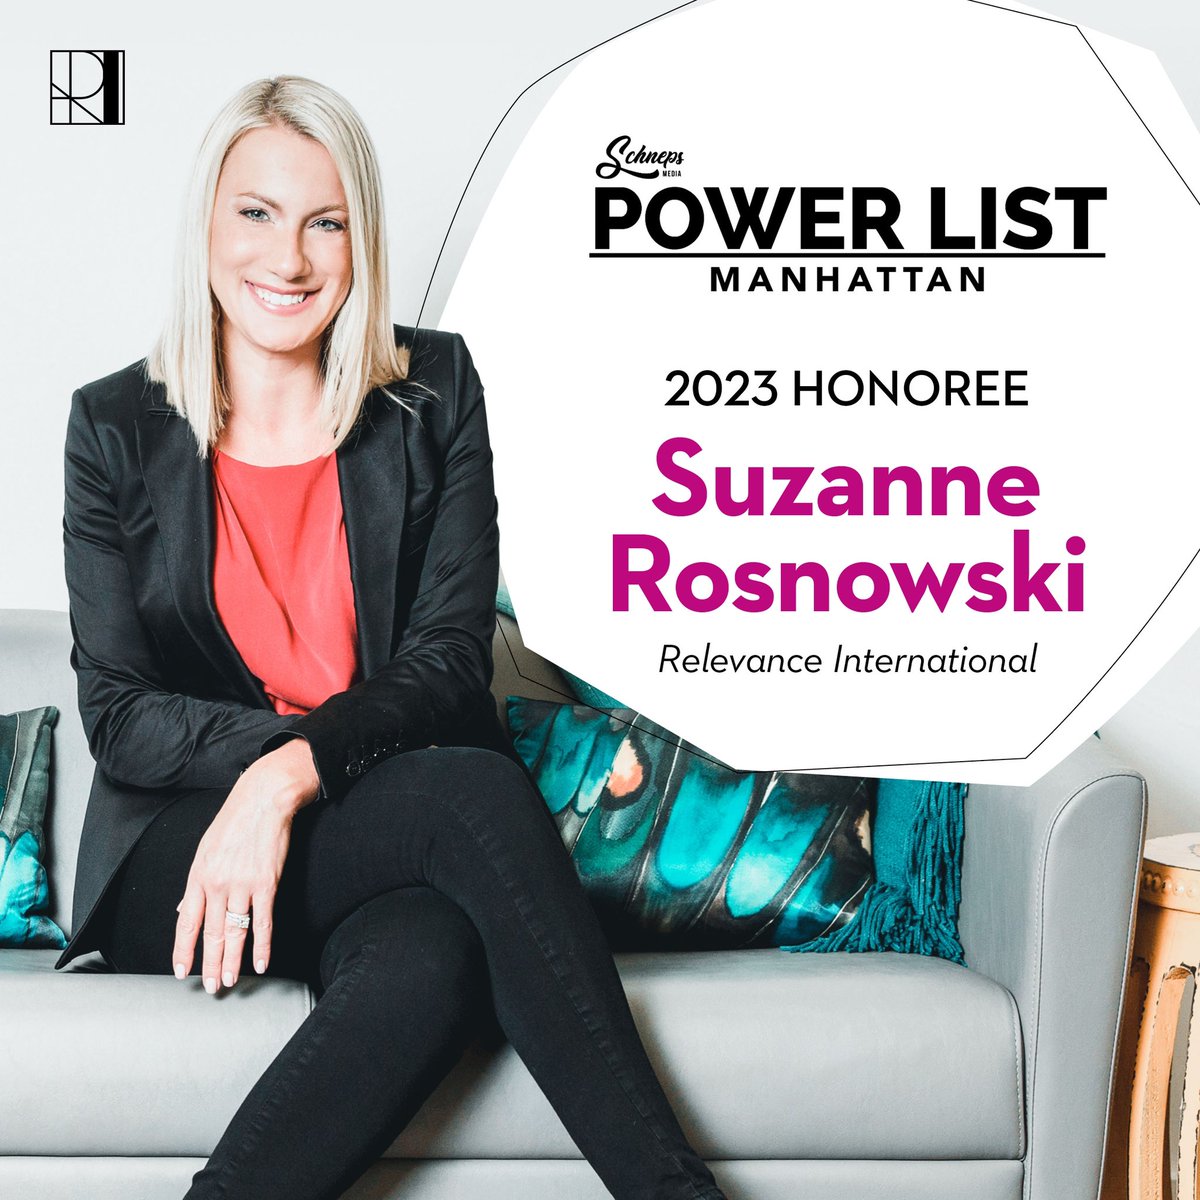 I am grateful & humbled to to be included in The Manhattan Power List 2023 by @schnepsmedia. It's an incredible privilege to be recognized among the best leaders of innovation and evolution in New York City. Thank you! #BestofNYC #TopBusinessLeaders #PowerListManhattan #NYC #MWBE